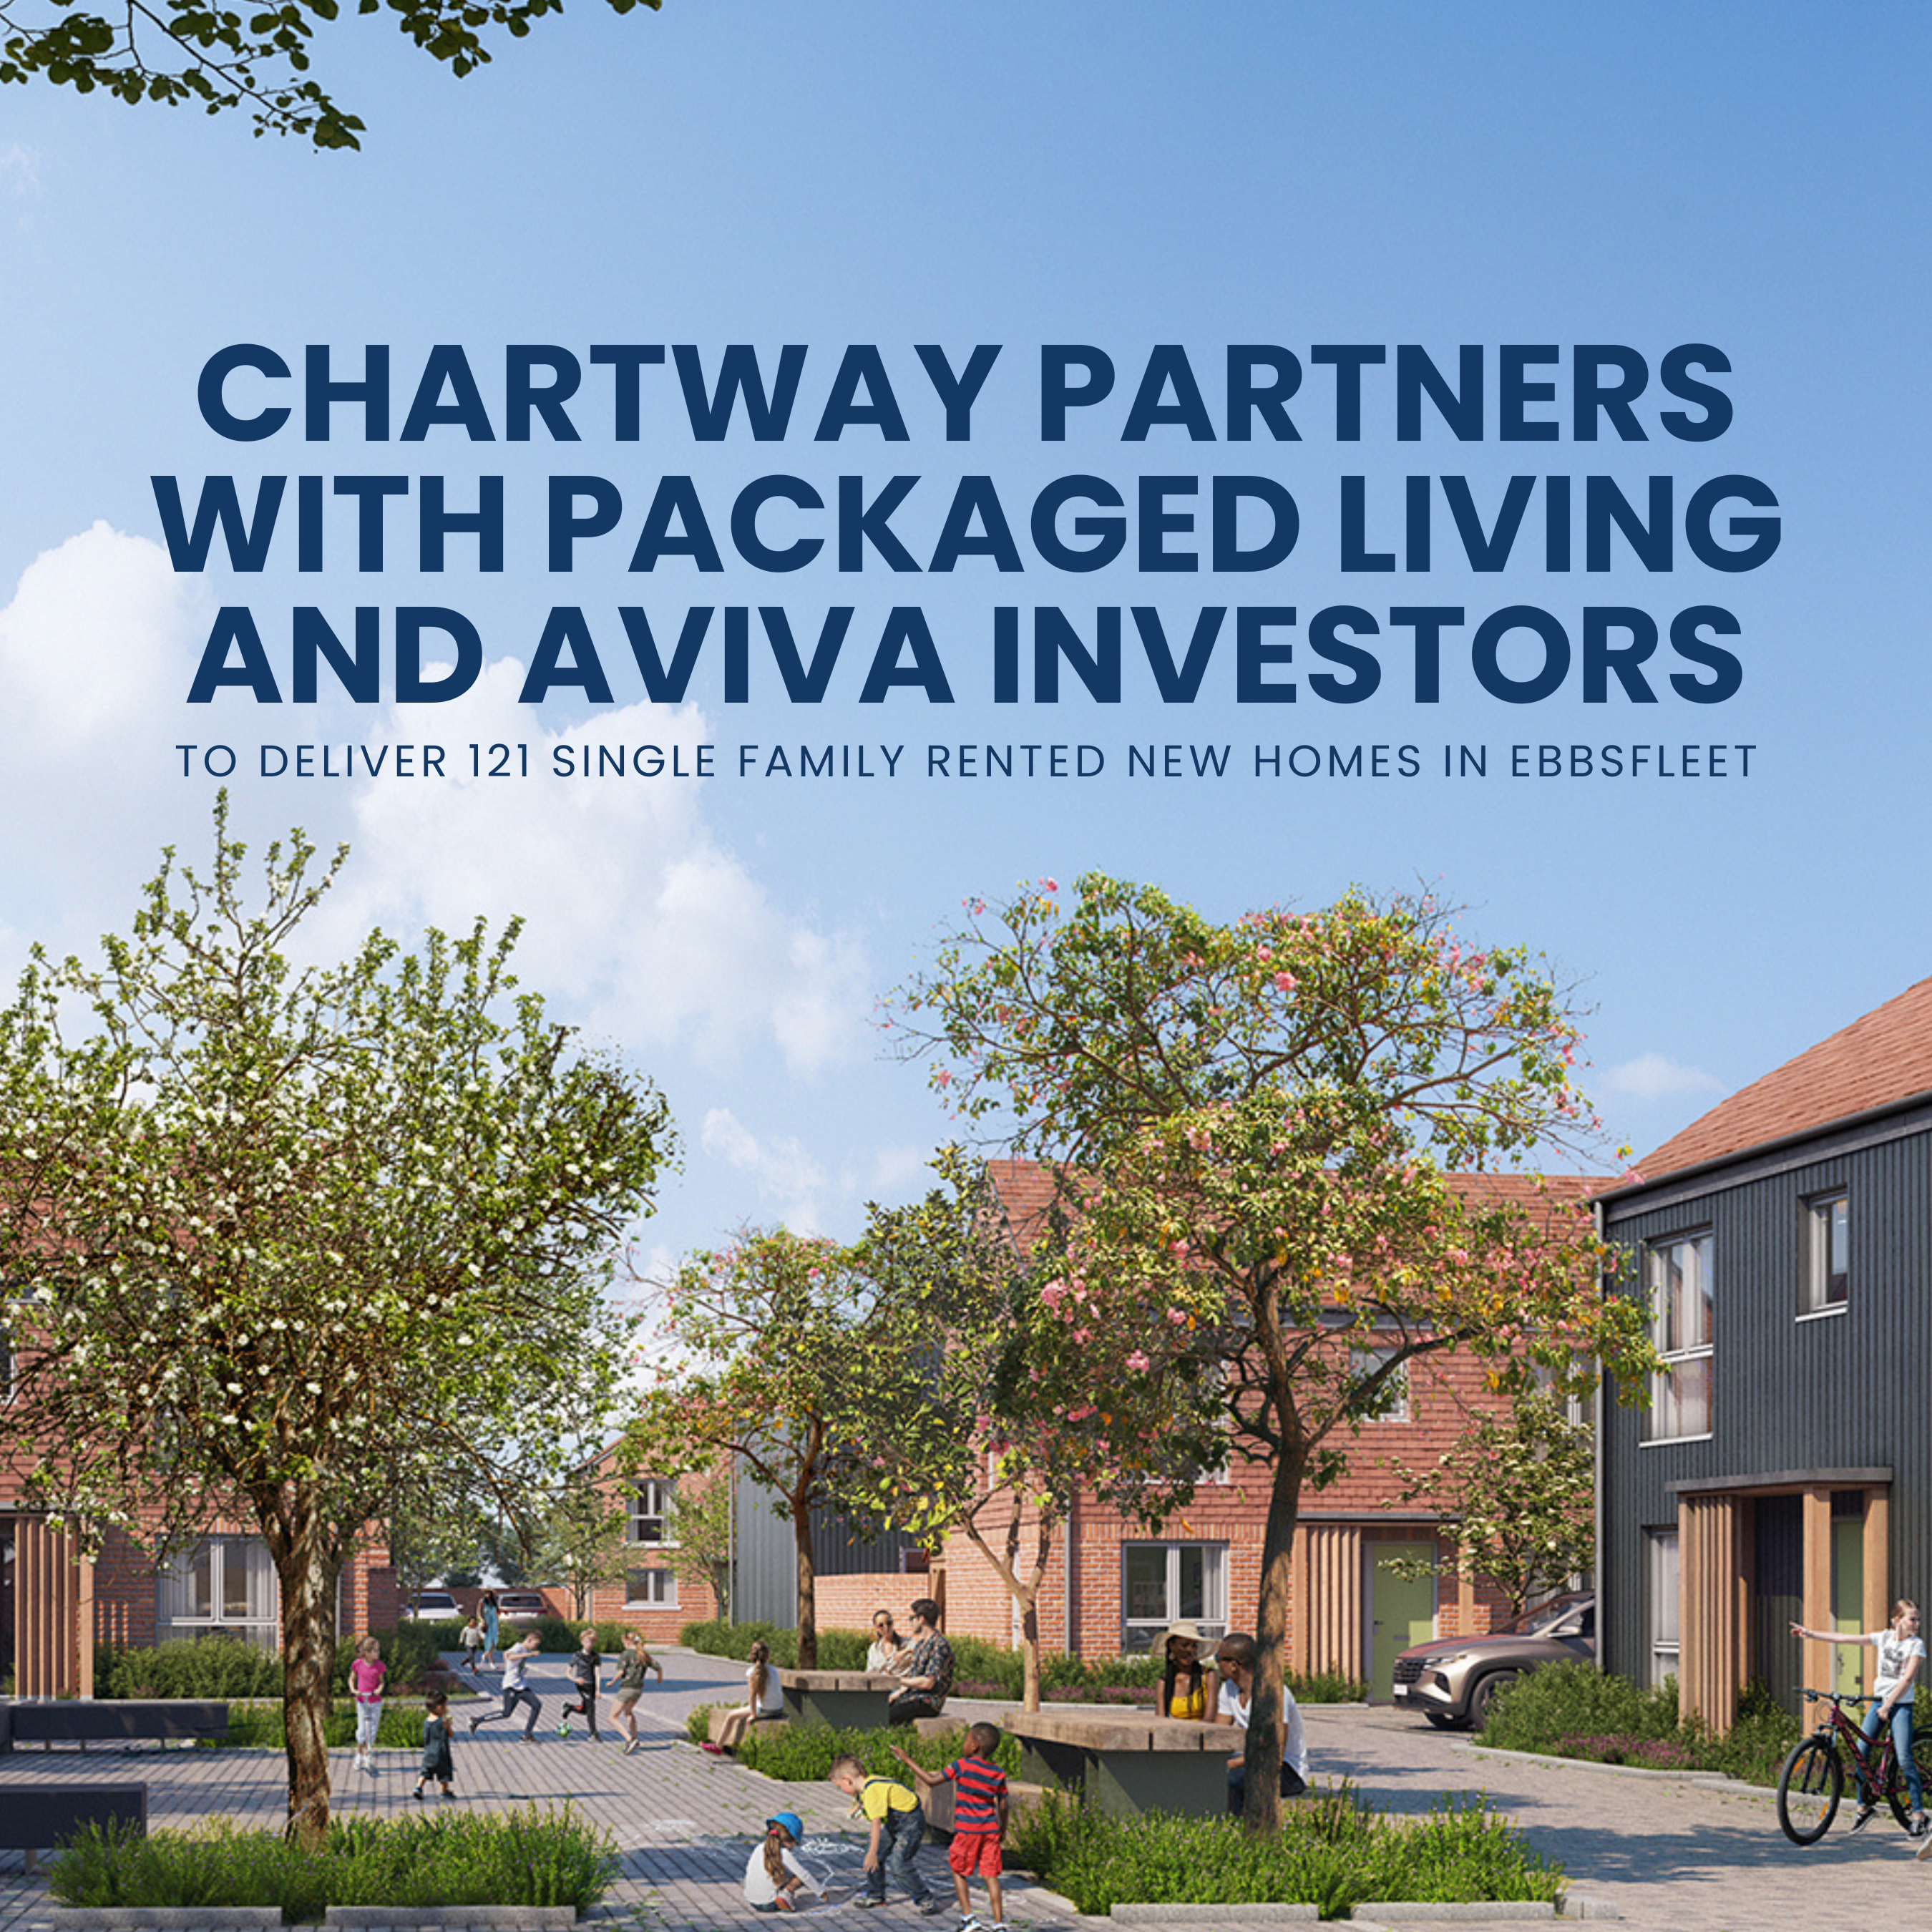 Packaged Living and Aviva fund delivery of 121 SFR homes in Ebbsfleet in partnership with Chartway